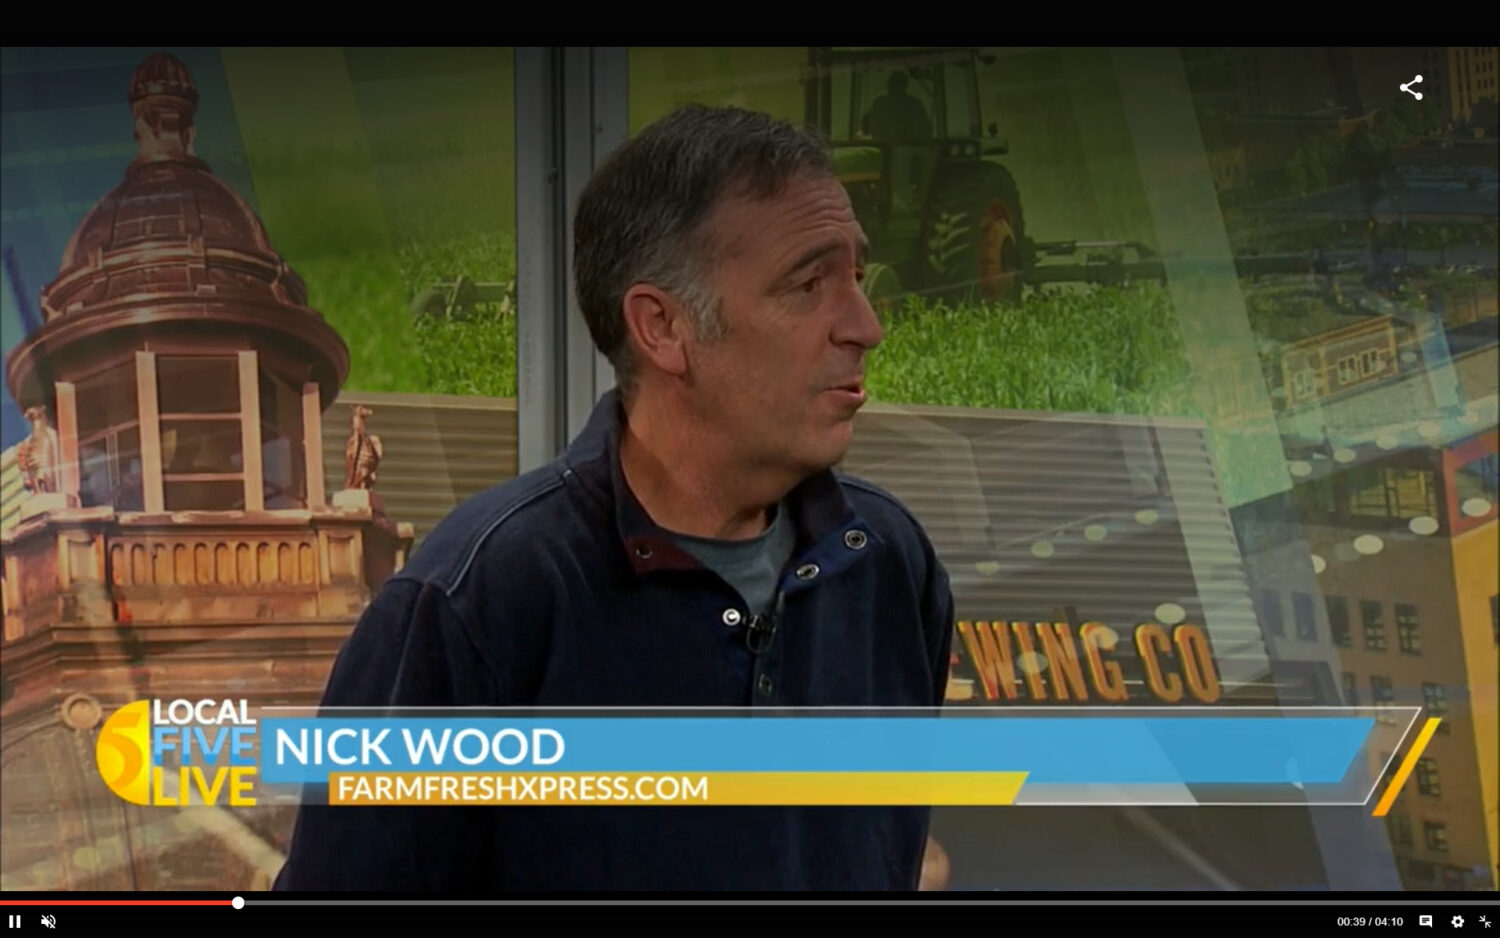 Wood on Local 5 Live